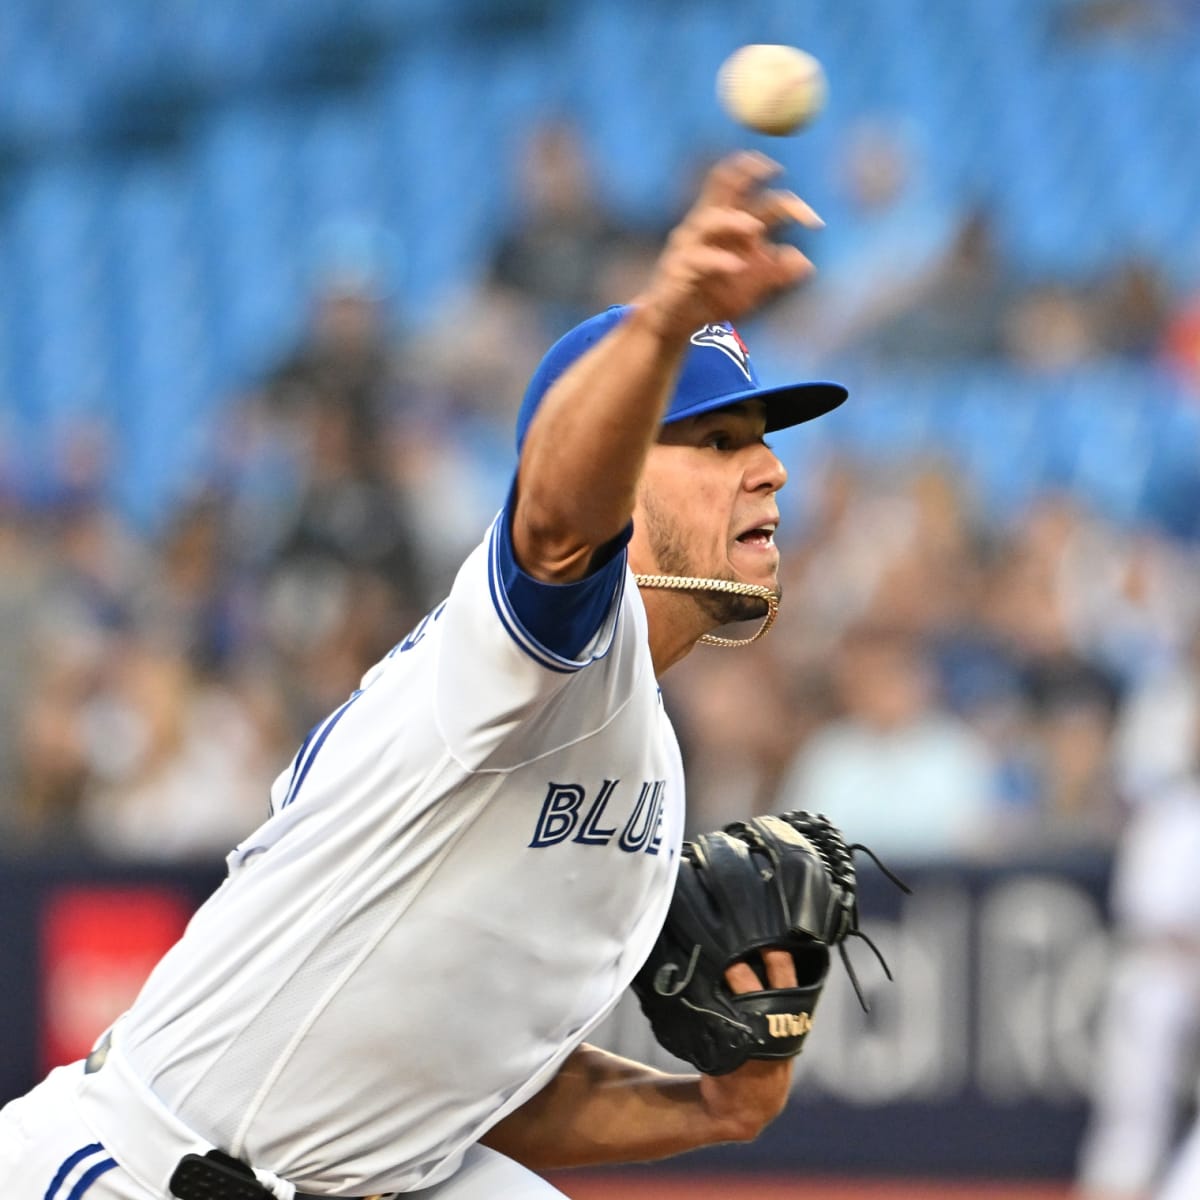 BLUE JAYS NOTEBOOK: Berrios aims to keep building confidence at WBC